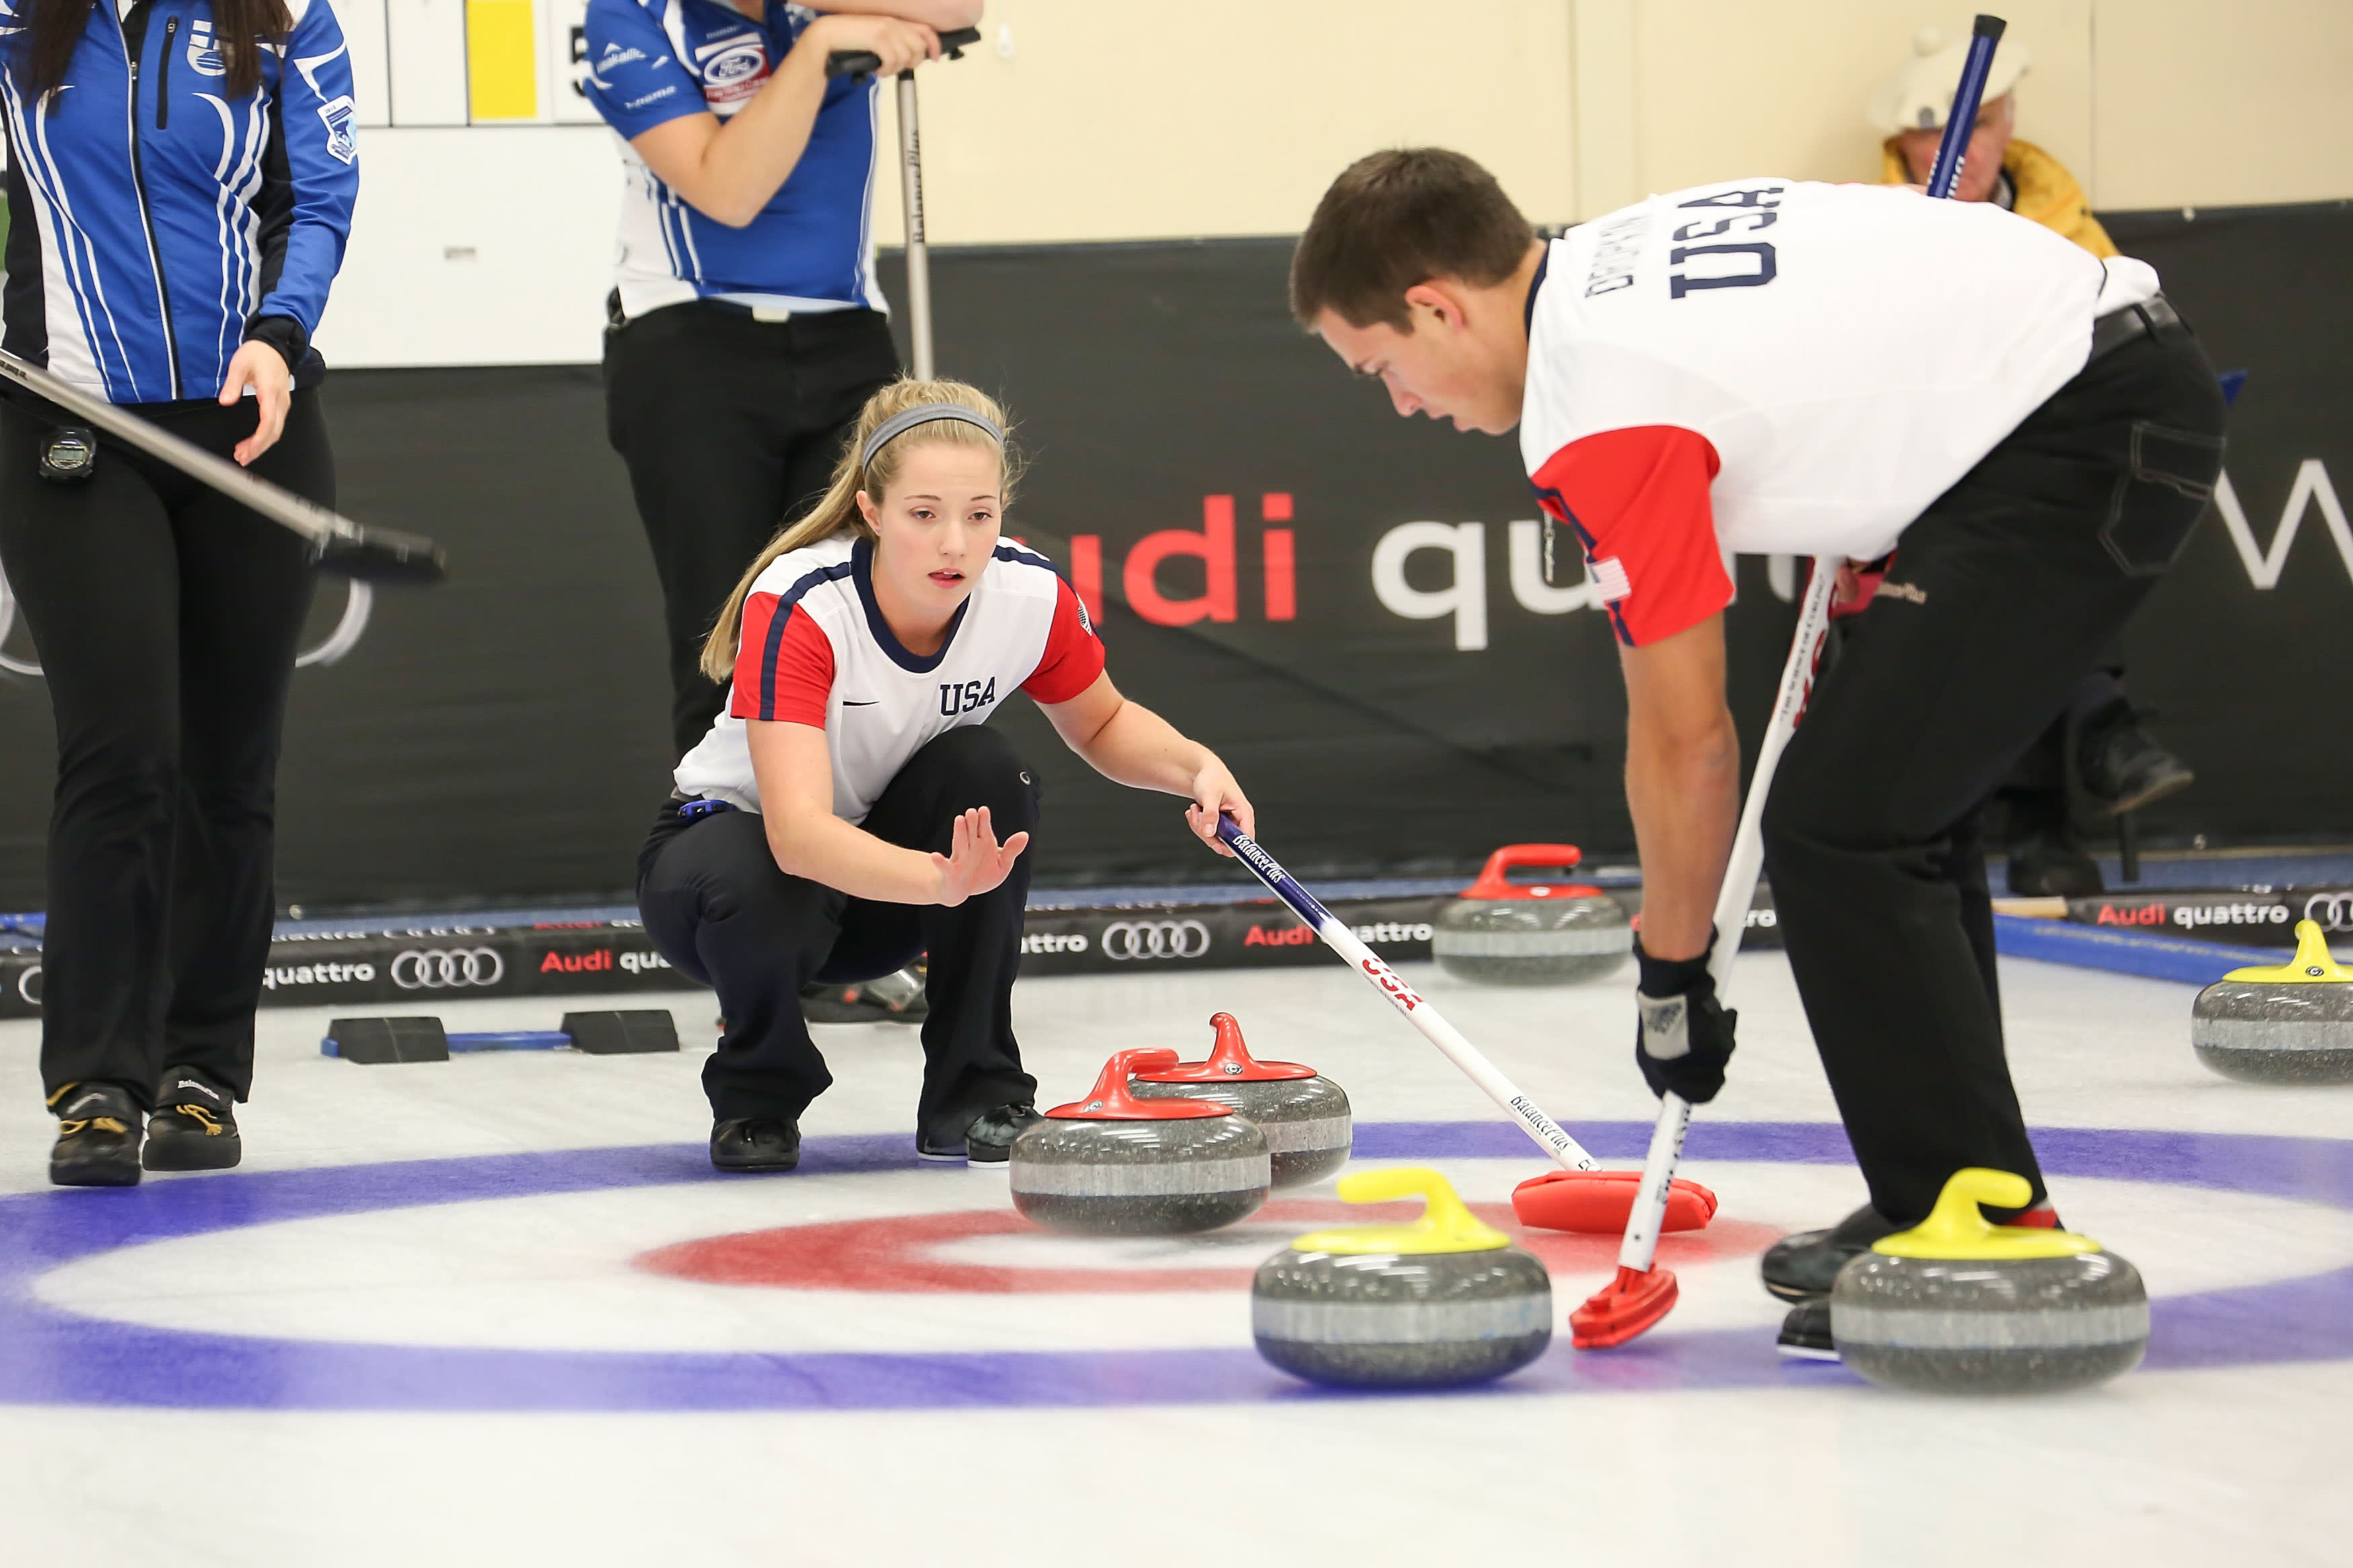 Use of High-Tech Brooms Divides Low-Tech Sport of Curling